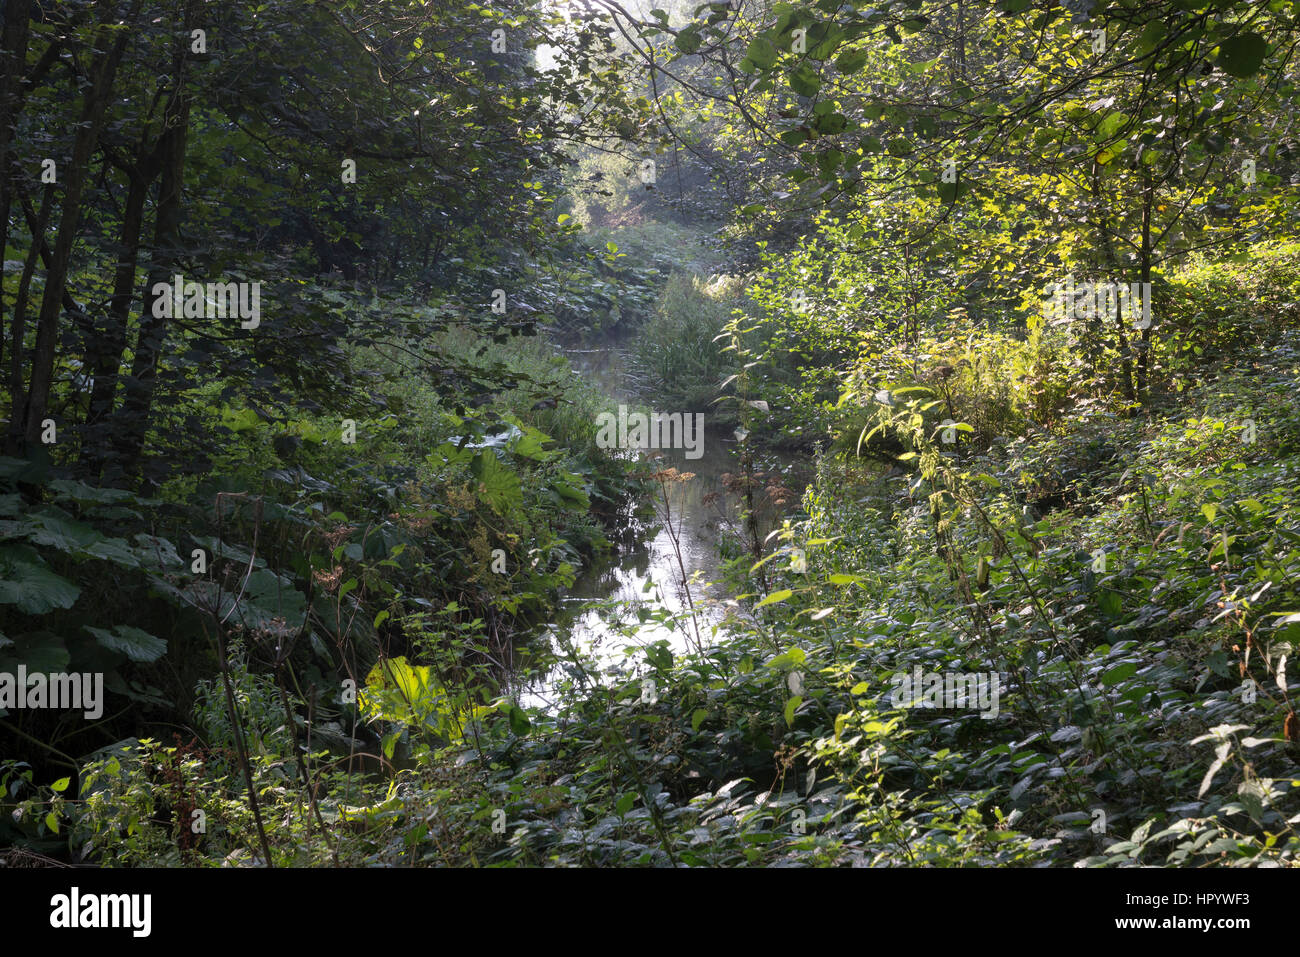 Late summer greenery beside the river Derwent in Forge Valley woods, Scarborough, North Yorkshire. Stock Photo